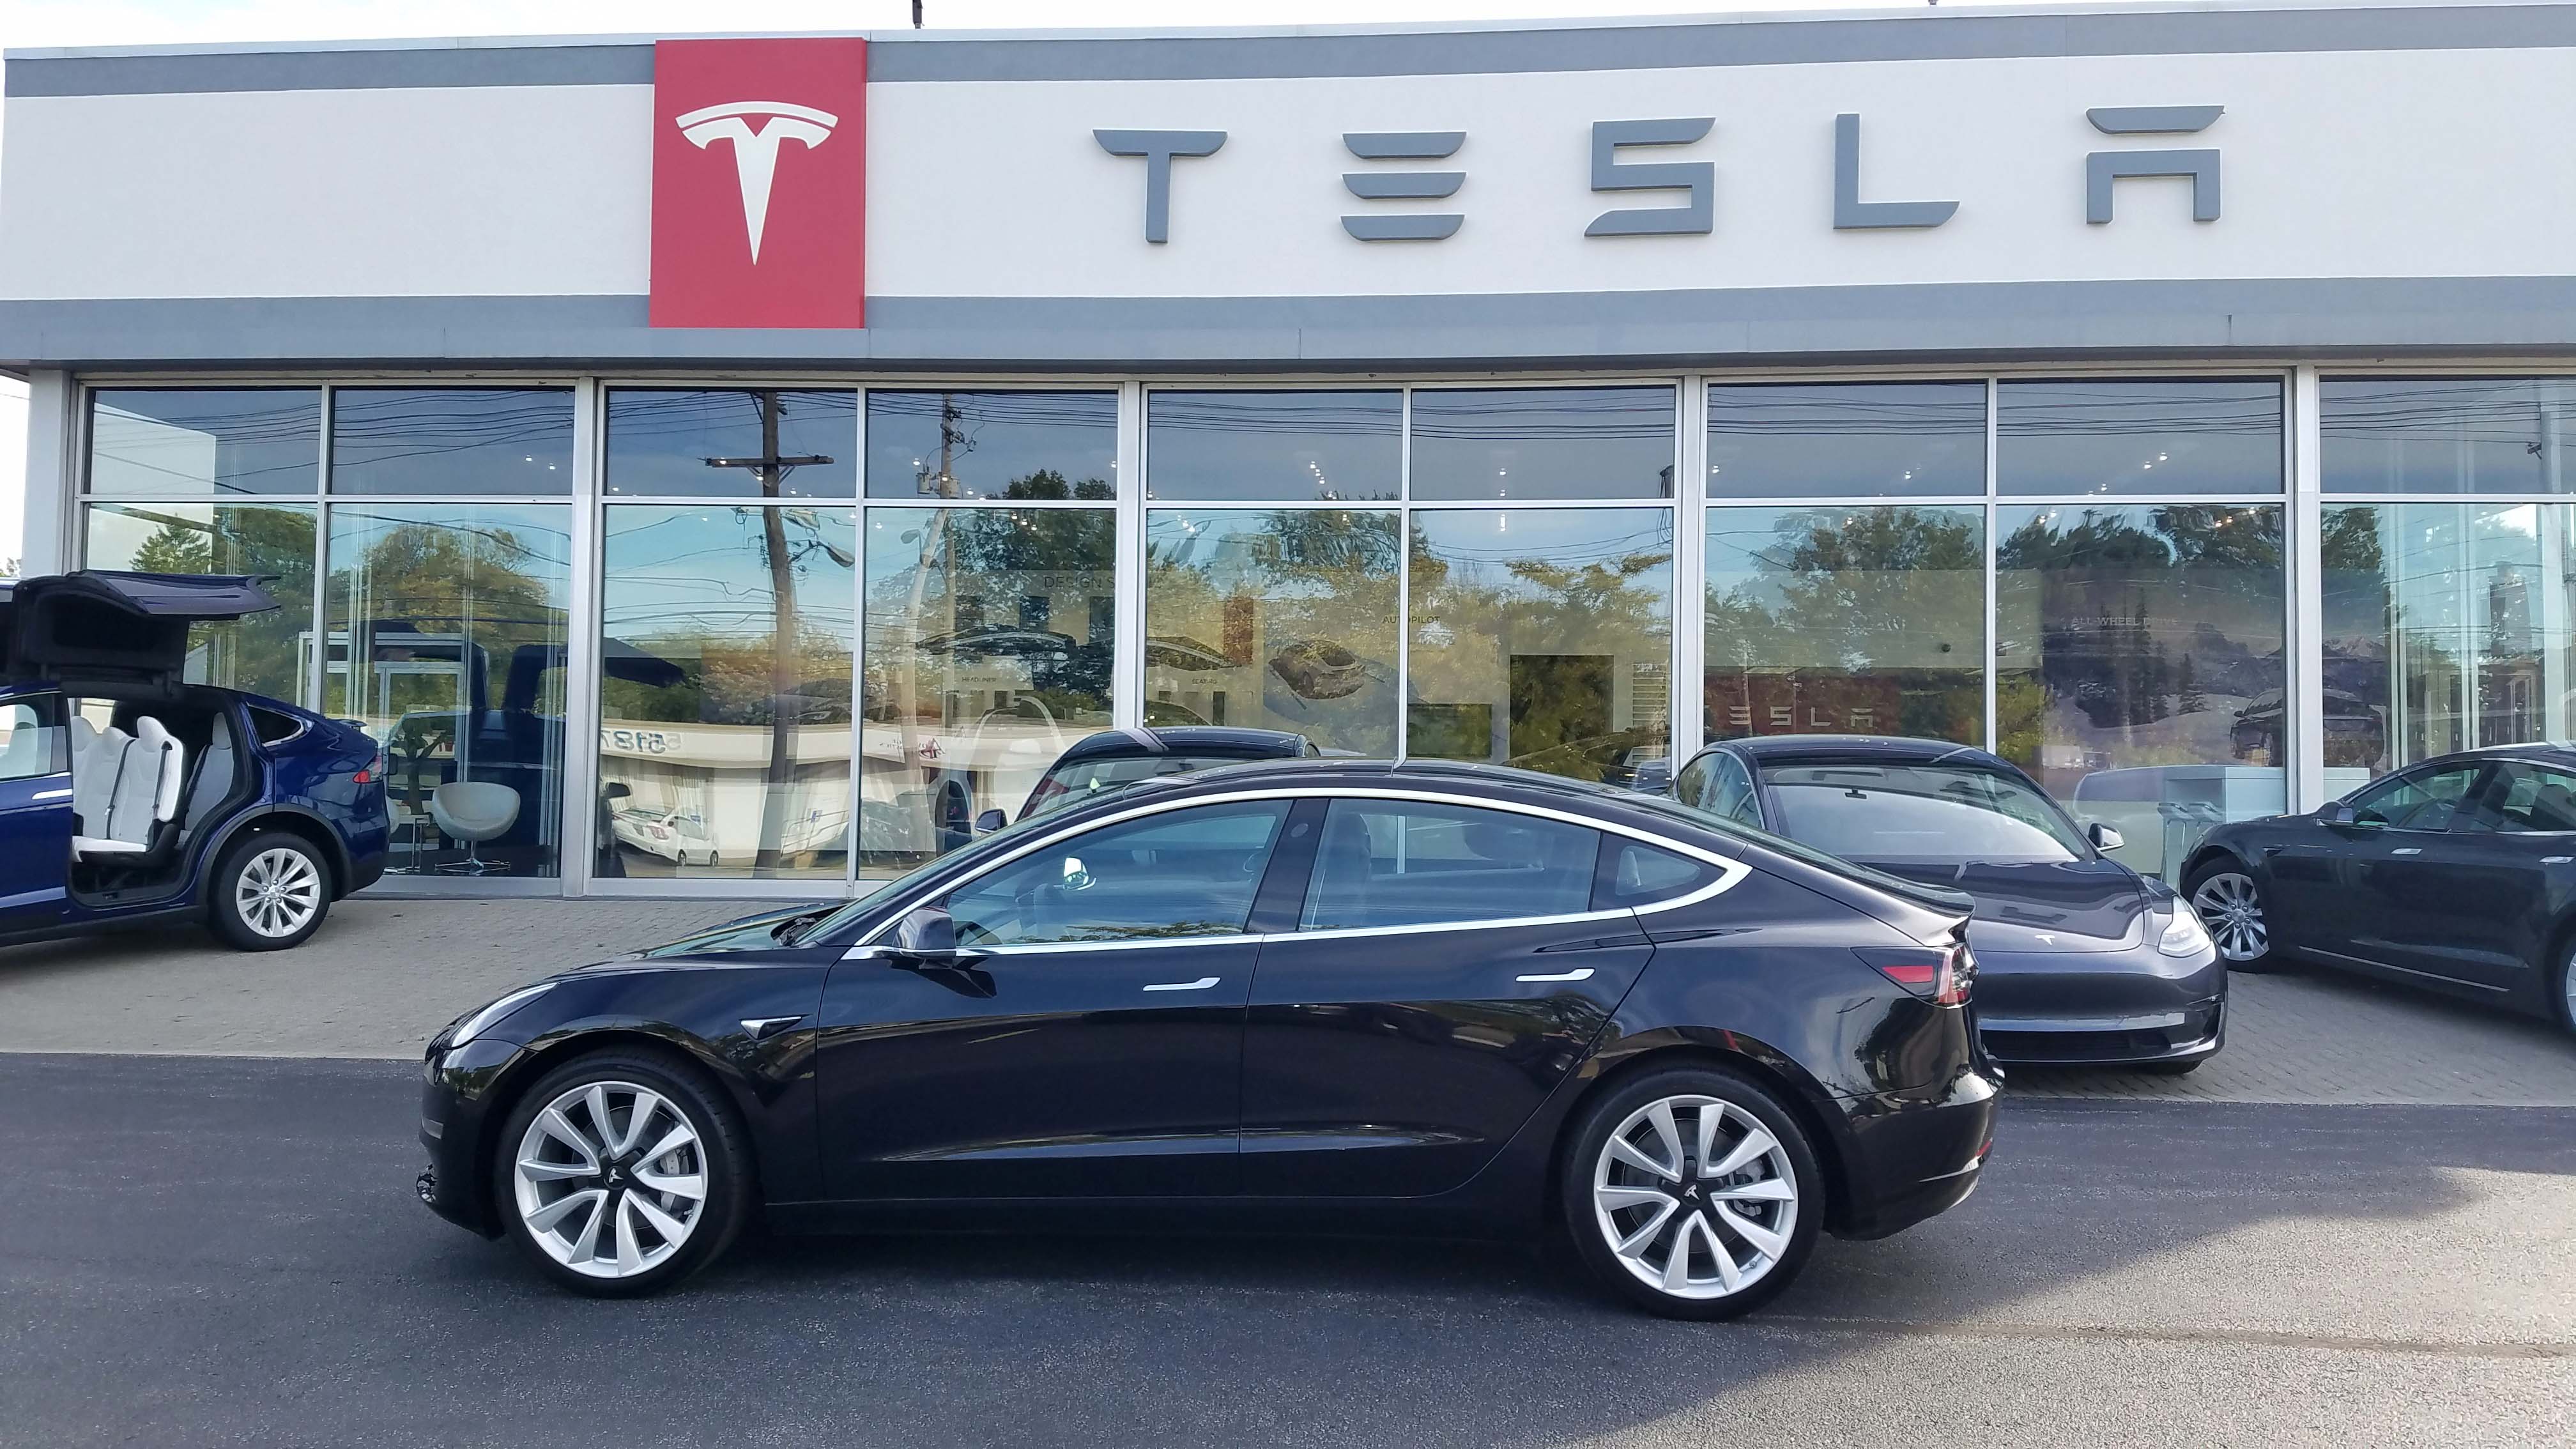 The Tesla Cleveland-Lyndhurst dealership in Ohio. Unlike Michigan, Ohio allows a limited number of manufacture-owned dealers.